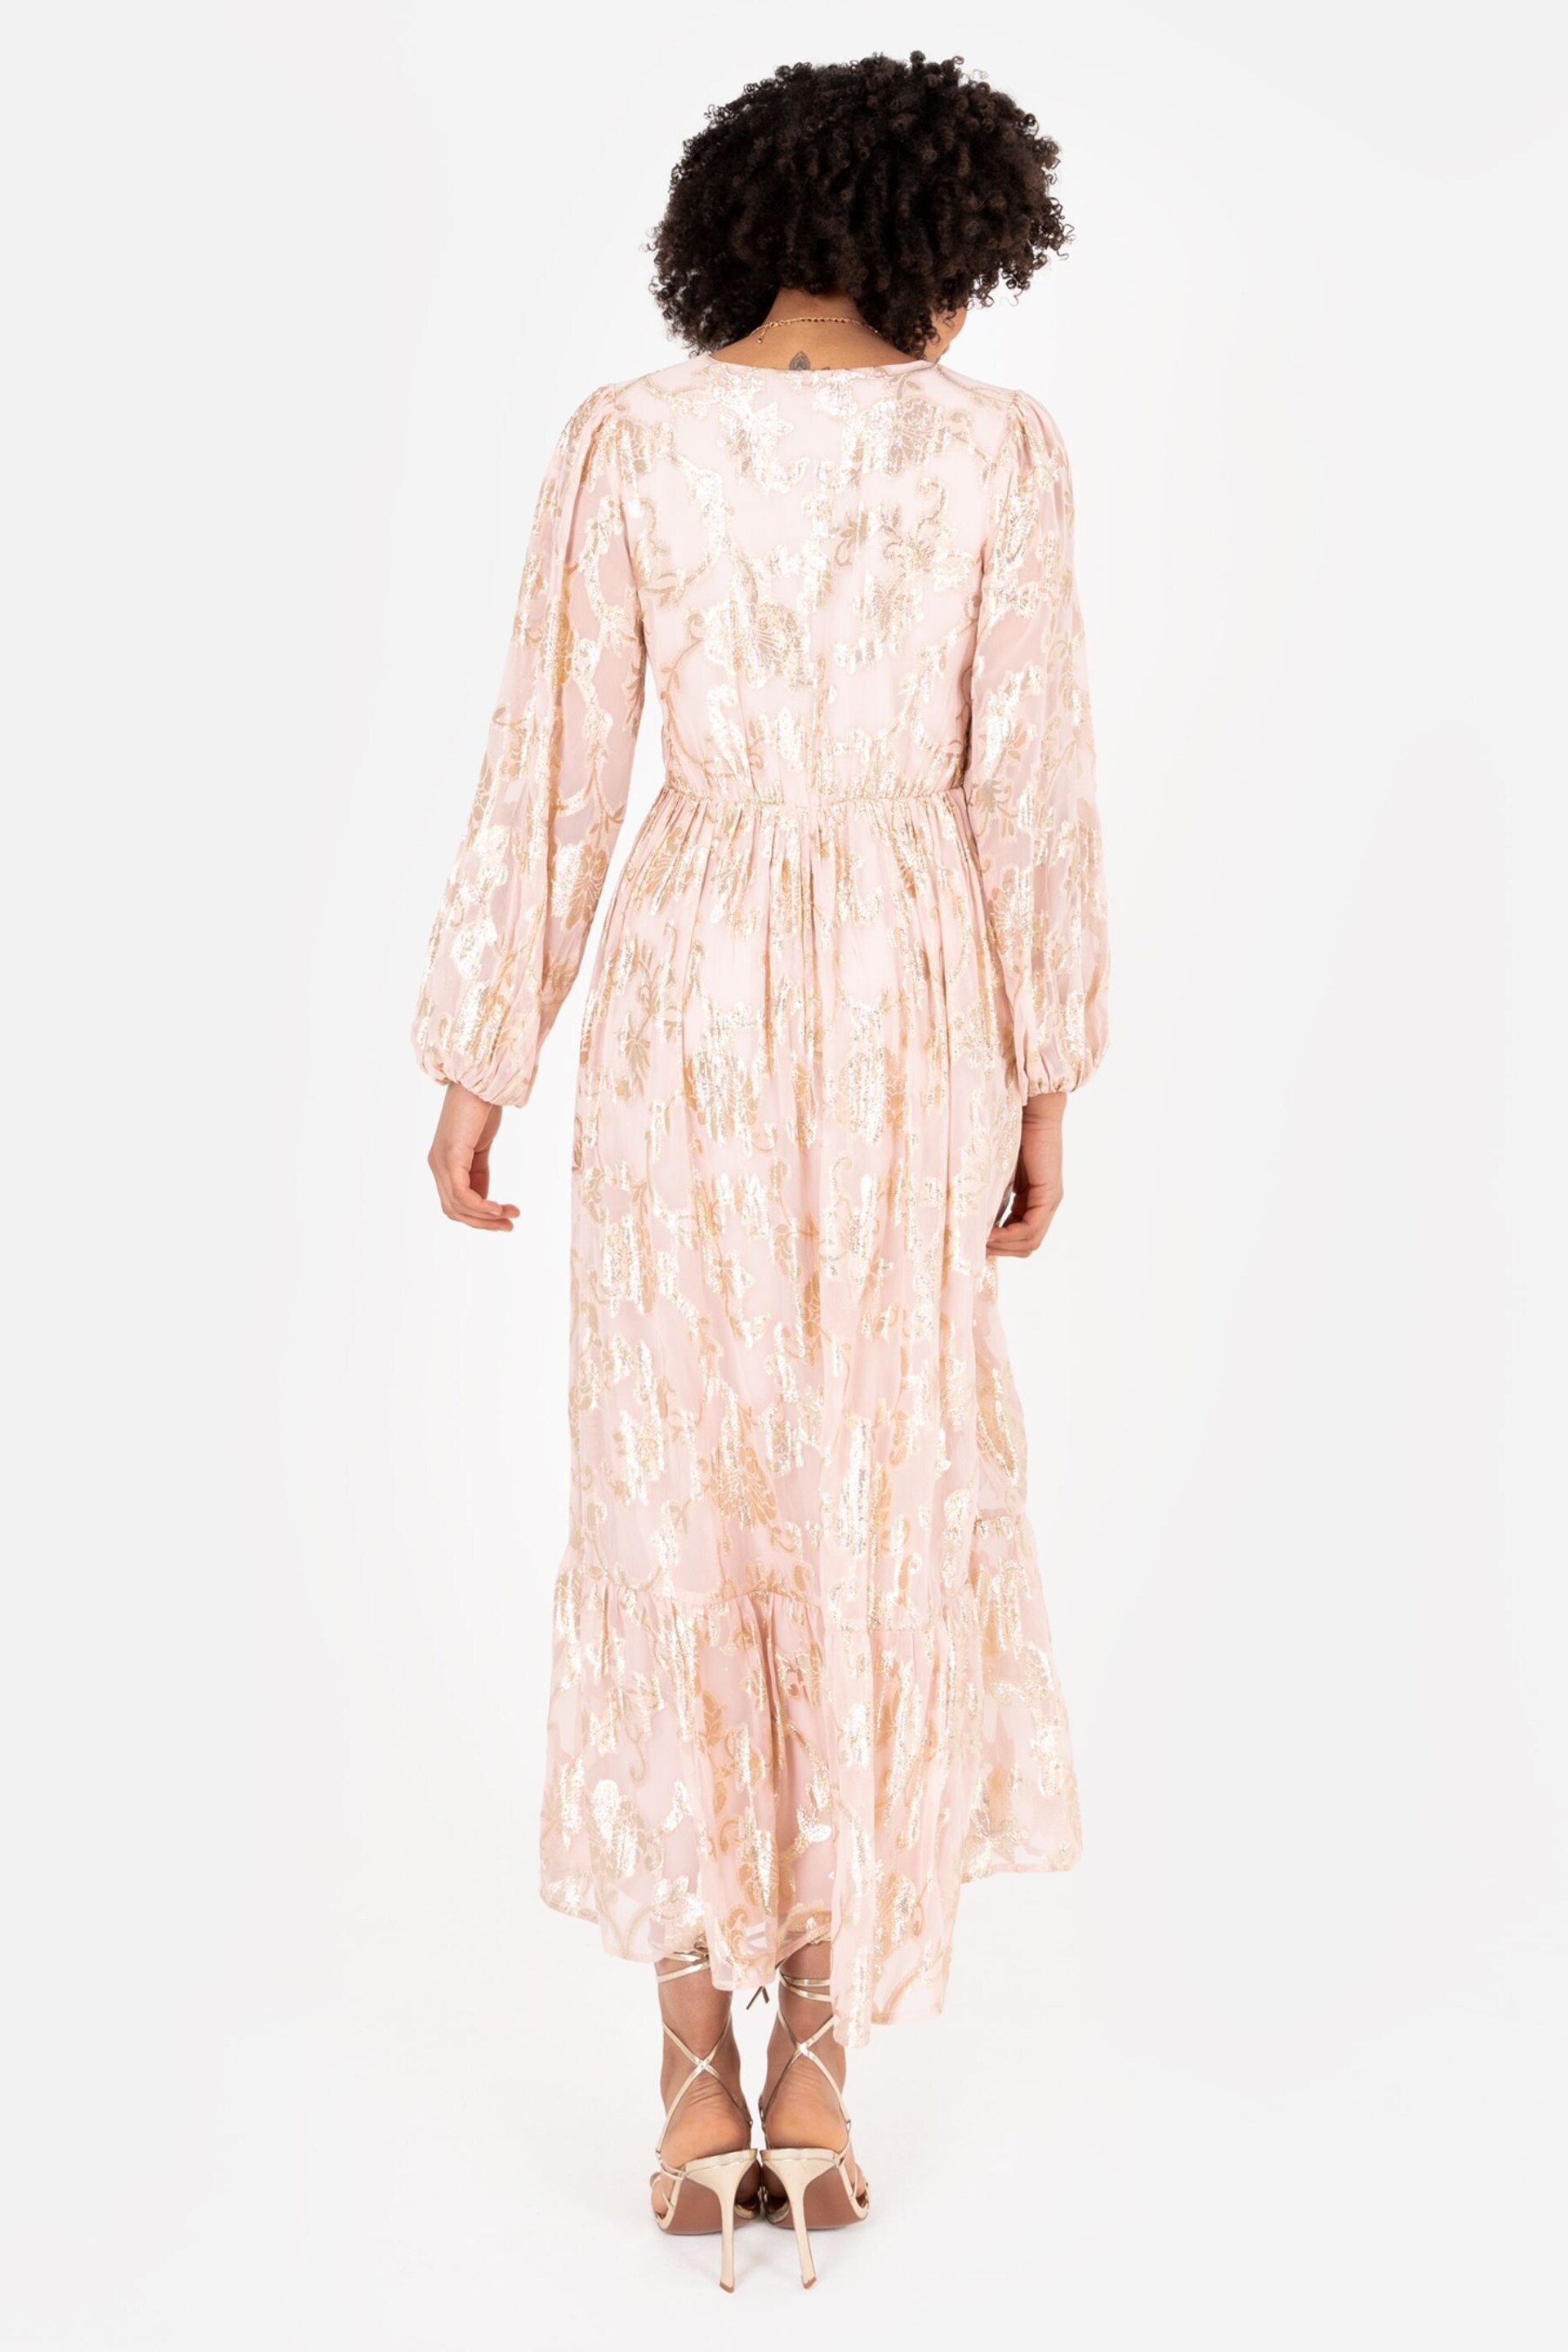 Lovedrobe Nude Long Sleeve Foiled Wrap Front Midaxi Dress - Image 2 of 6